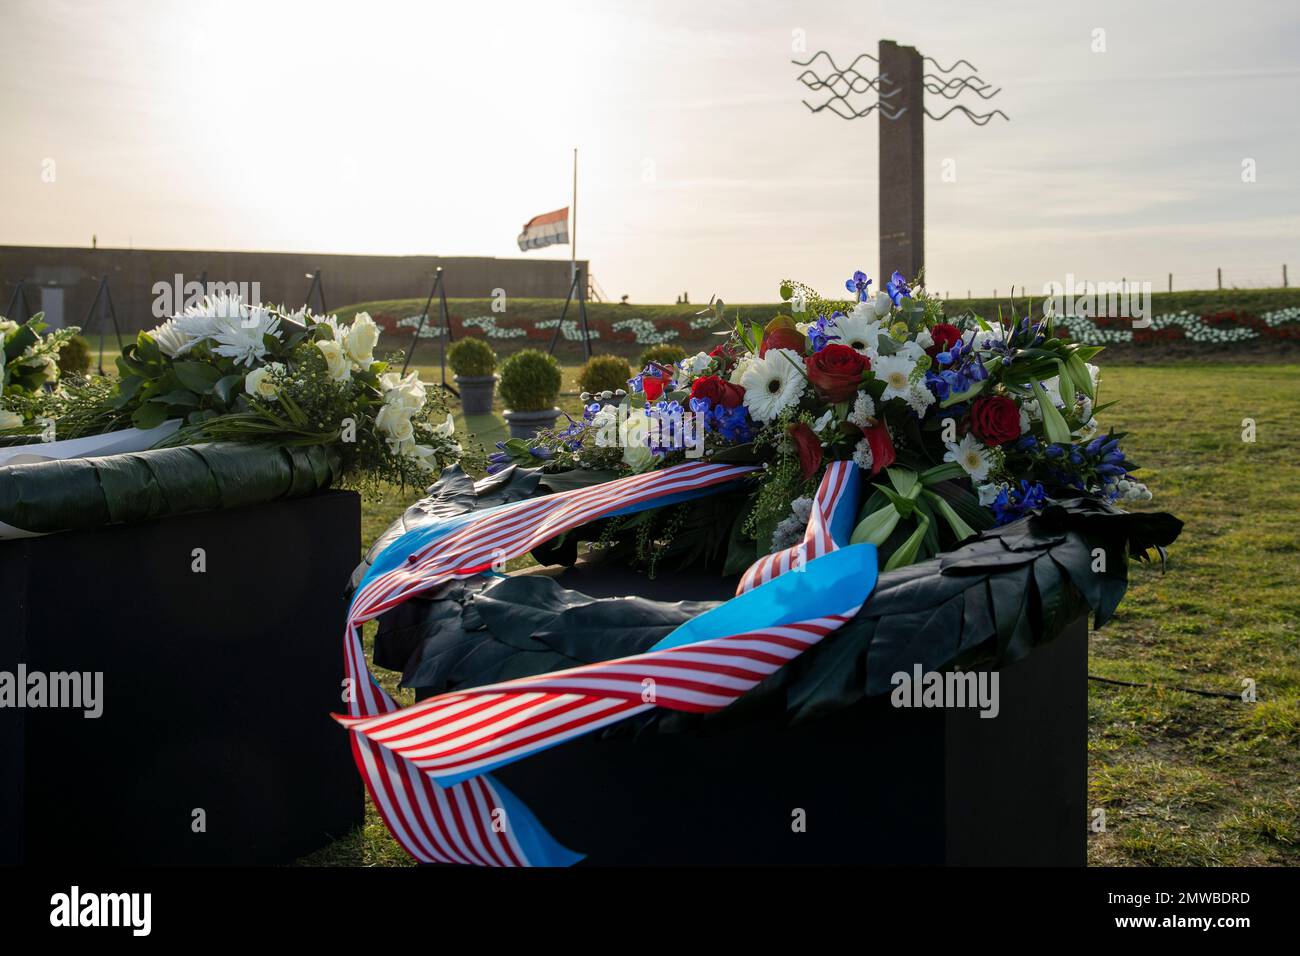 OUWERKERK, THE NETHERLANDS - FEBRUARI 1: The US Memorial wreath during The Flood of 1953 Commemoration at The Watersnoodmuseum (Flood Museum) on February 1st, 2023 in Ouwerkerk, Netherlands (Photo by Peter van der Klooster/Orange Pictures) Stock Photo